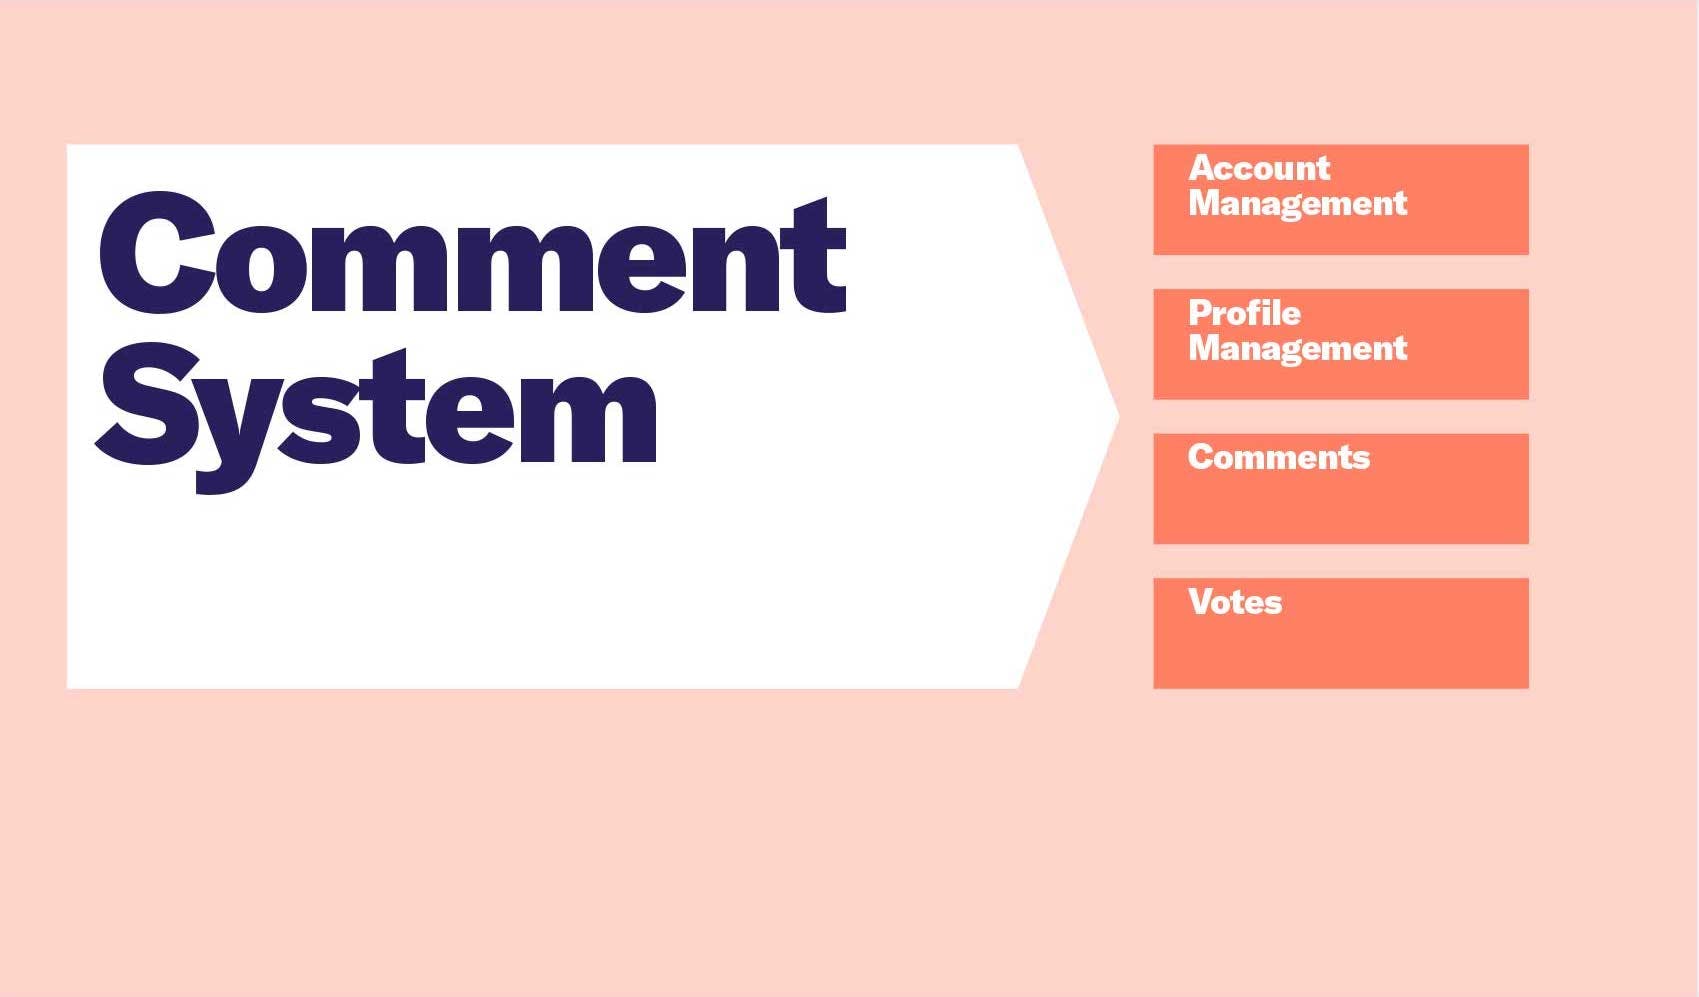 A visual representation of breaking down a comment system monolith into four smaller modules: Account Management, Profile Management, Comments, and Votes.